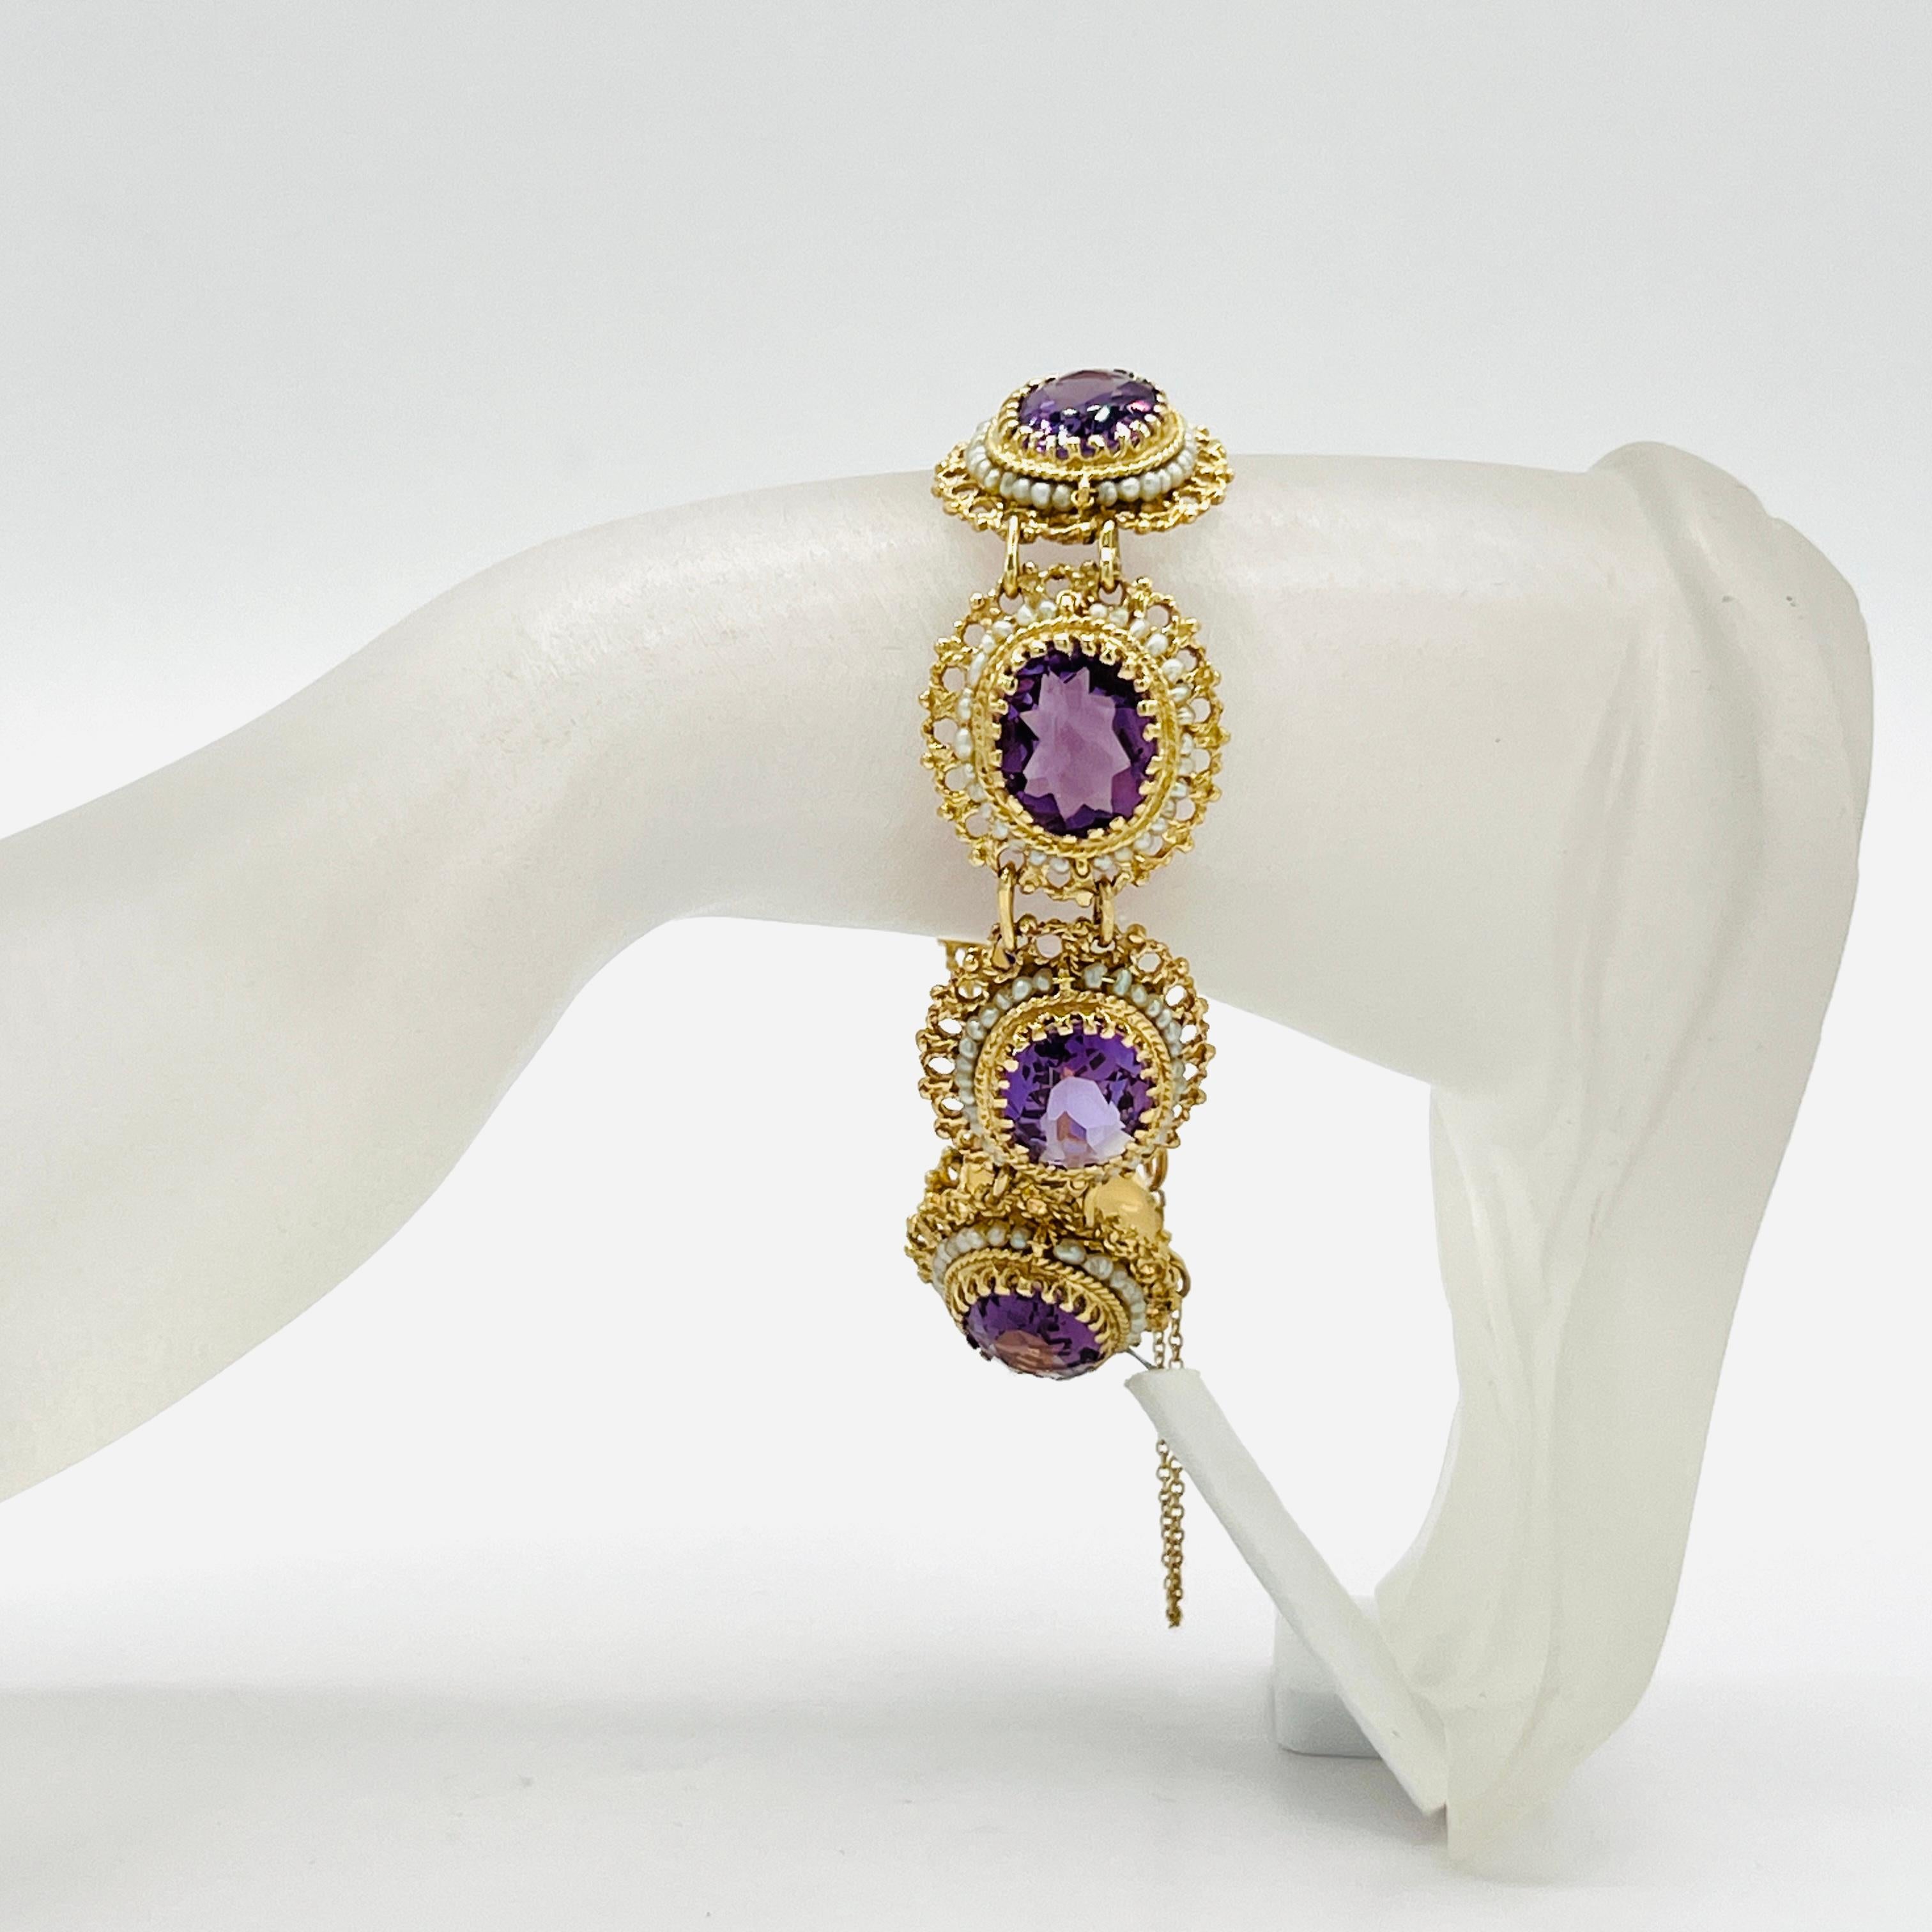 Beautiful 8 amethyst ovals and white pearls in a handmade in 14k yellow gold mounting.  Length is 7